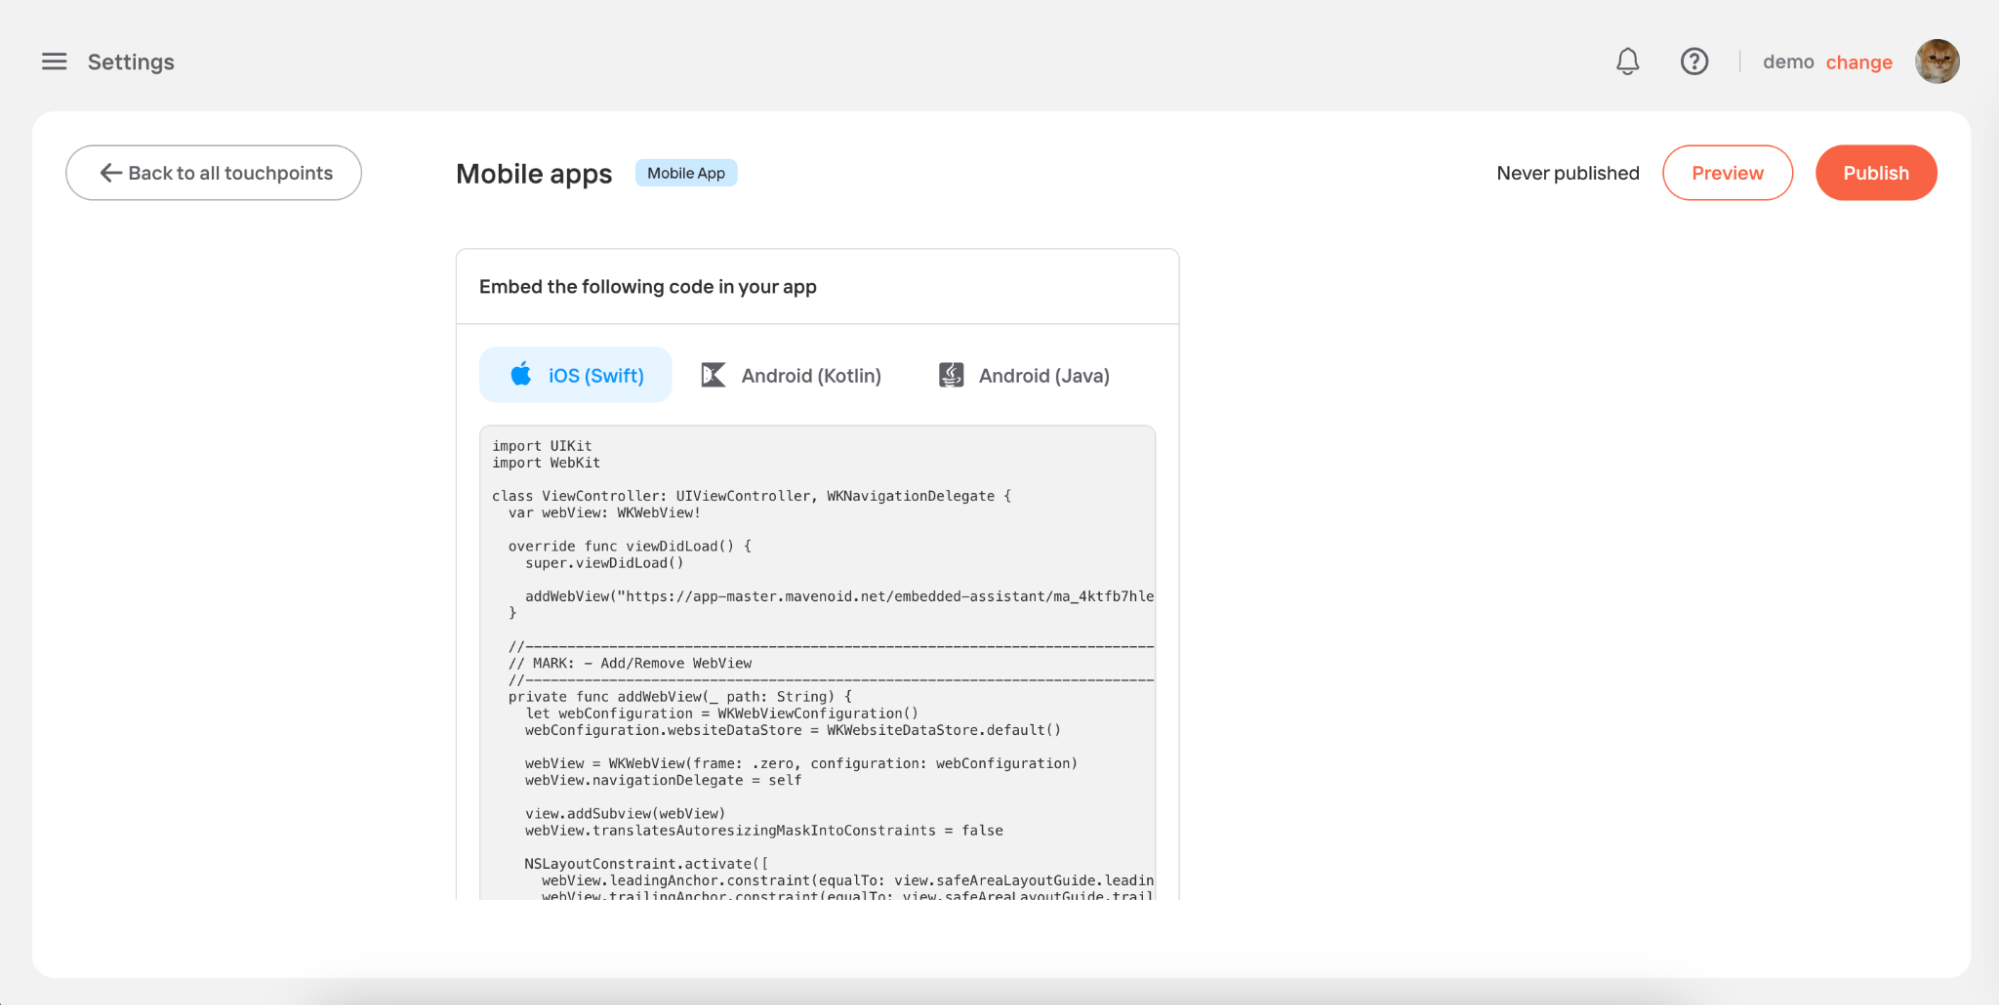 Mobile app touchpoint embed code